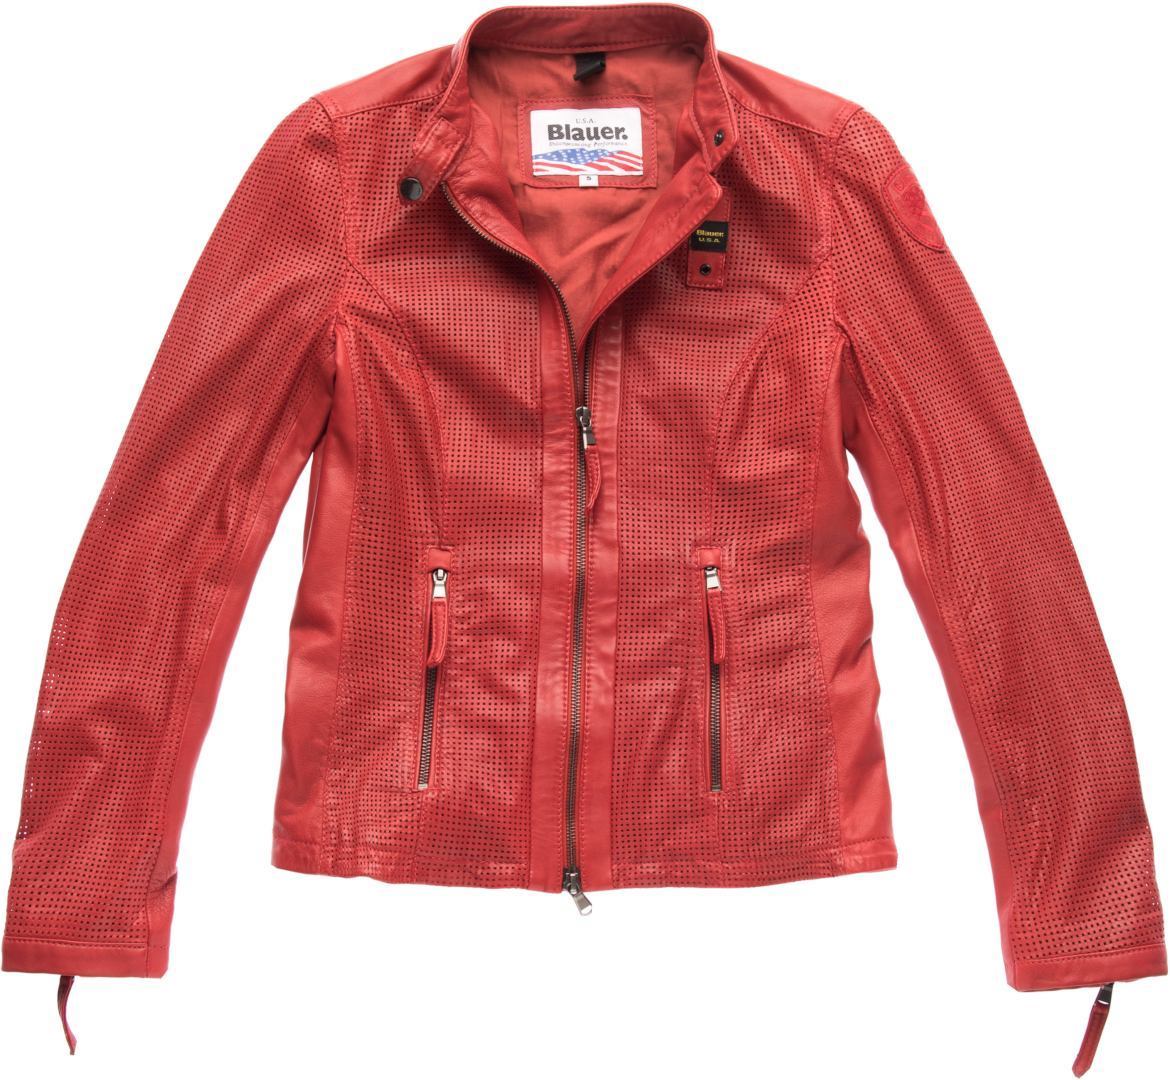 Image of Blauer USA Miller Giacca in pelle perforata Ladies, rosso, dimensione M per donne